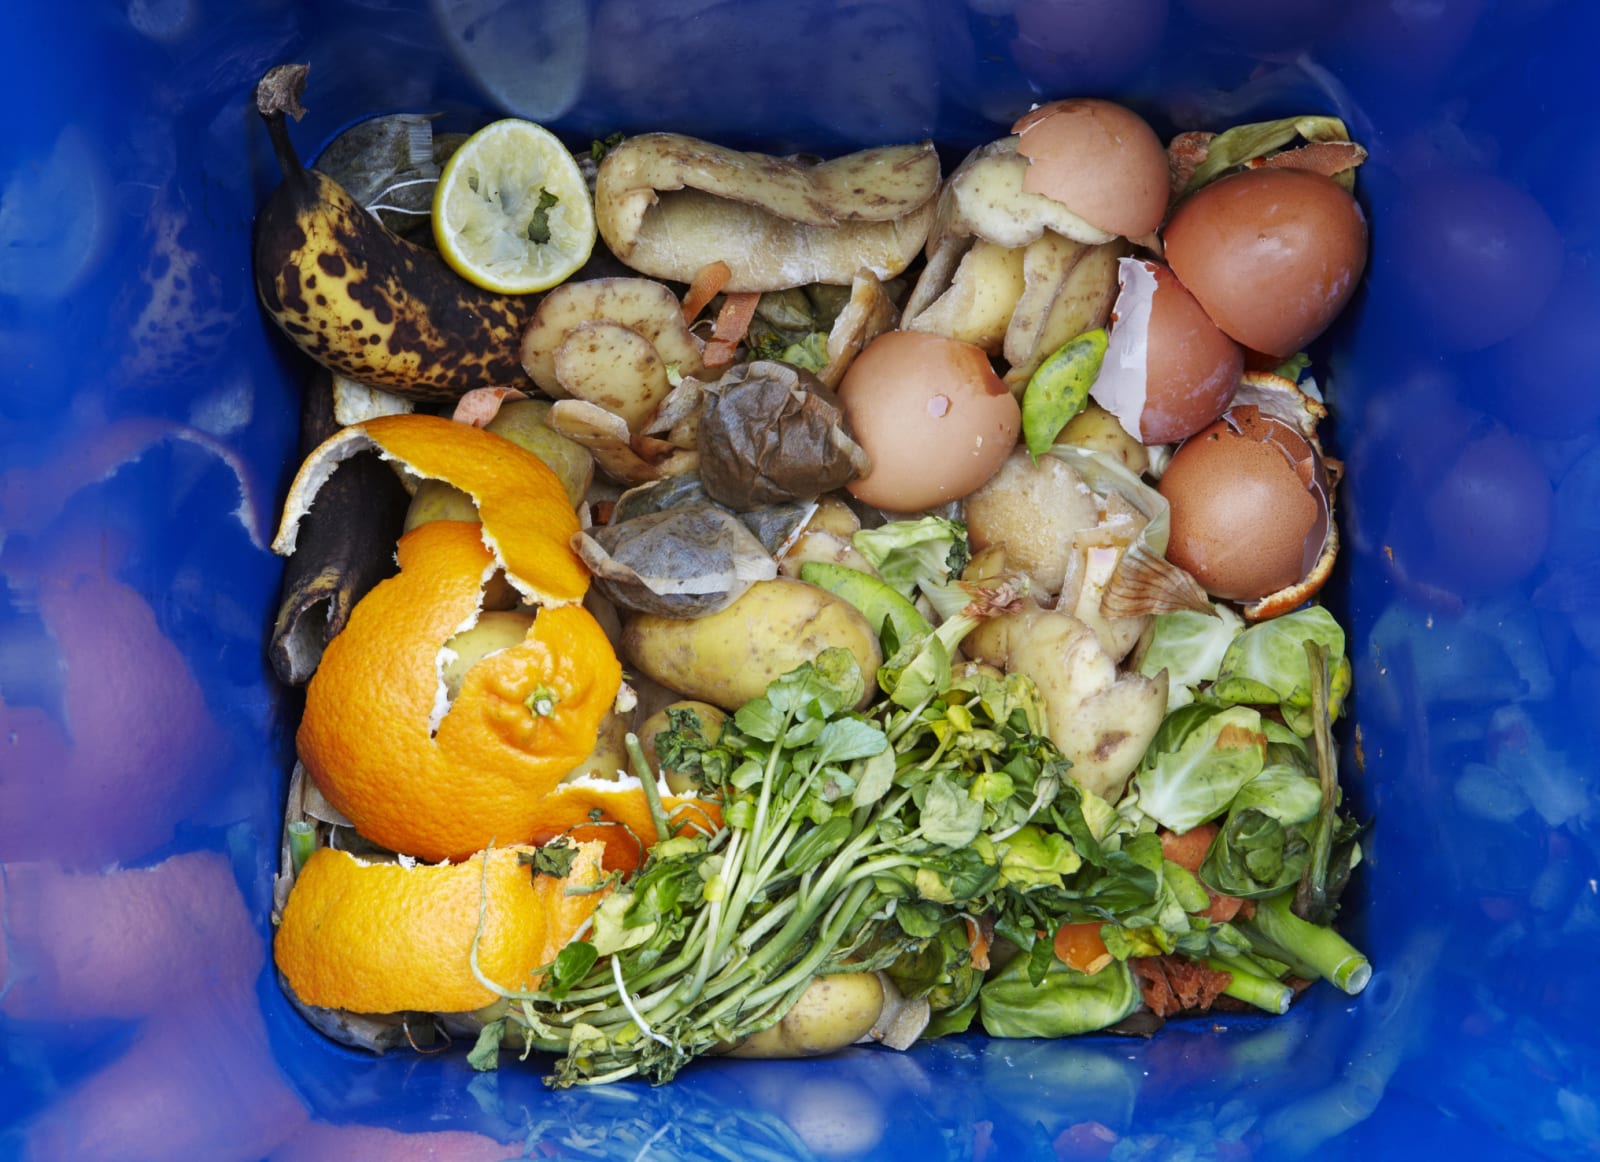 Food waste recycling caddy. The food waste in the UK is intended to be composted and thereby preventing it to be sent to landfil